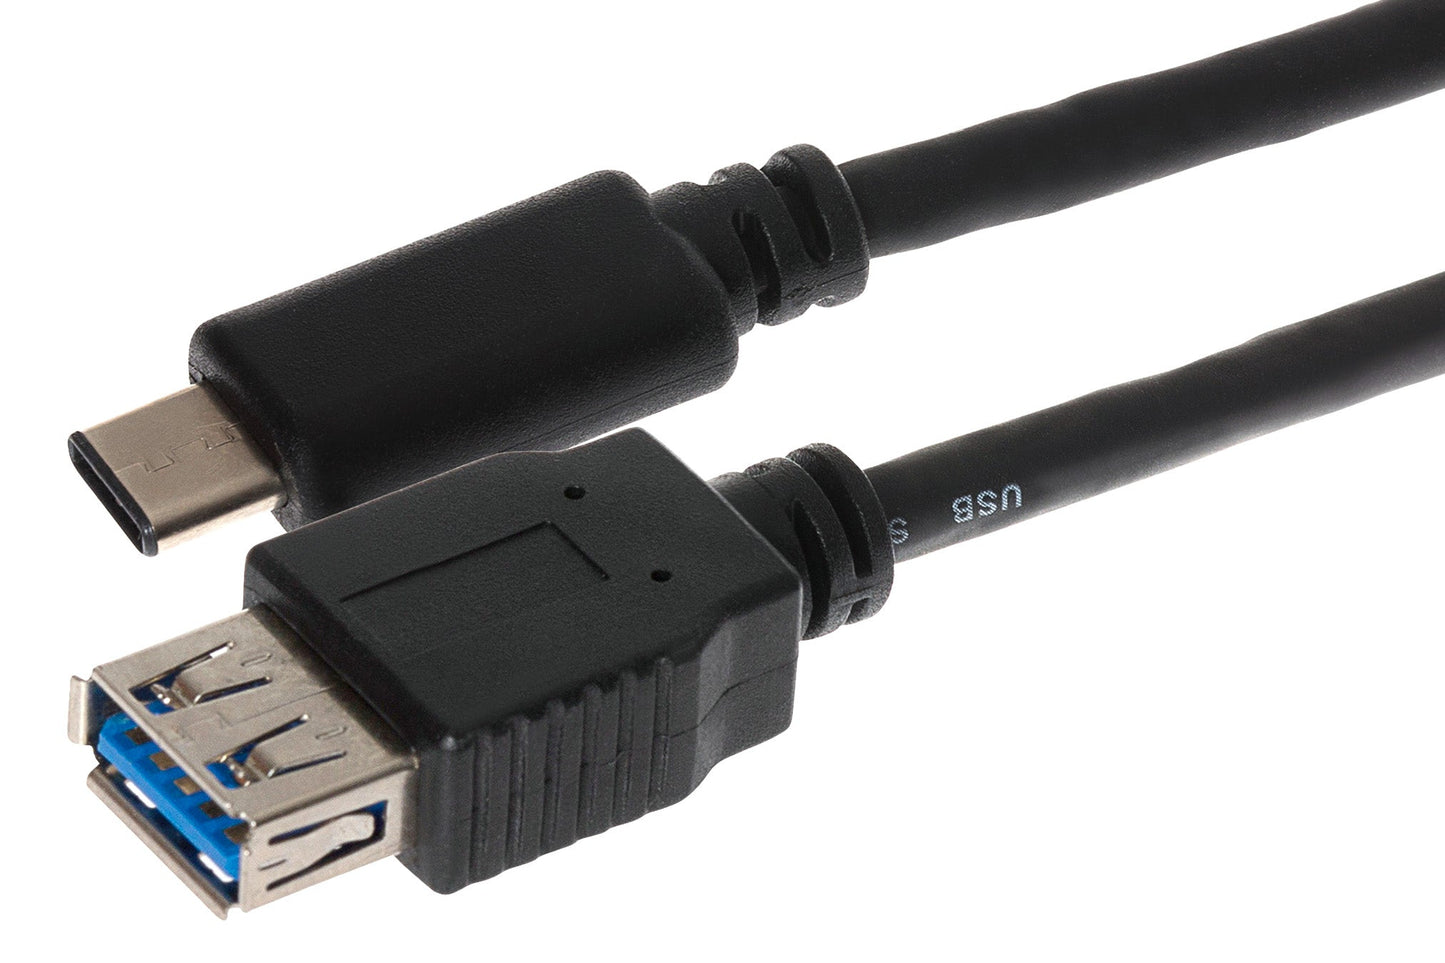 Maplin PRO USB-C Male to USB-A 3.1 Female Gen 2 60W Super Speed Data Transfer & Charging Adapter Cable - Black, 1m - maplin.co.uk